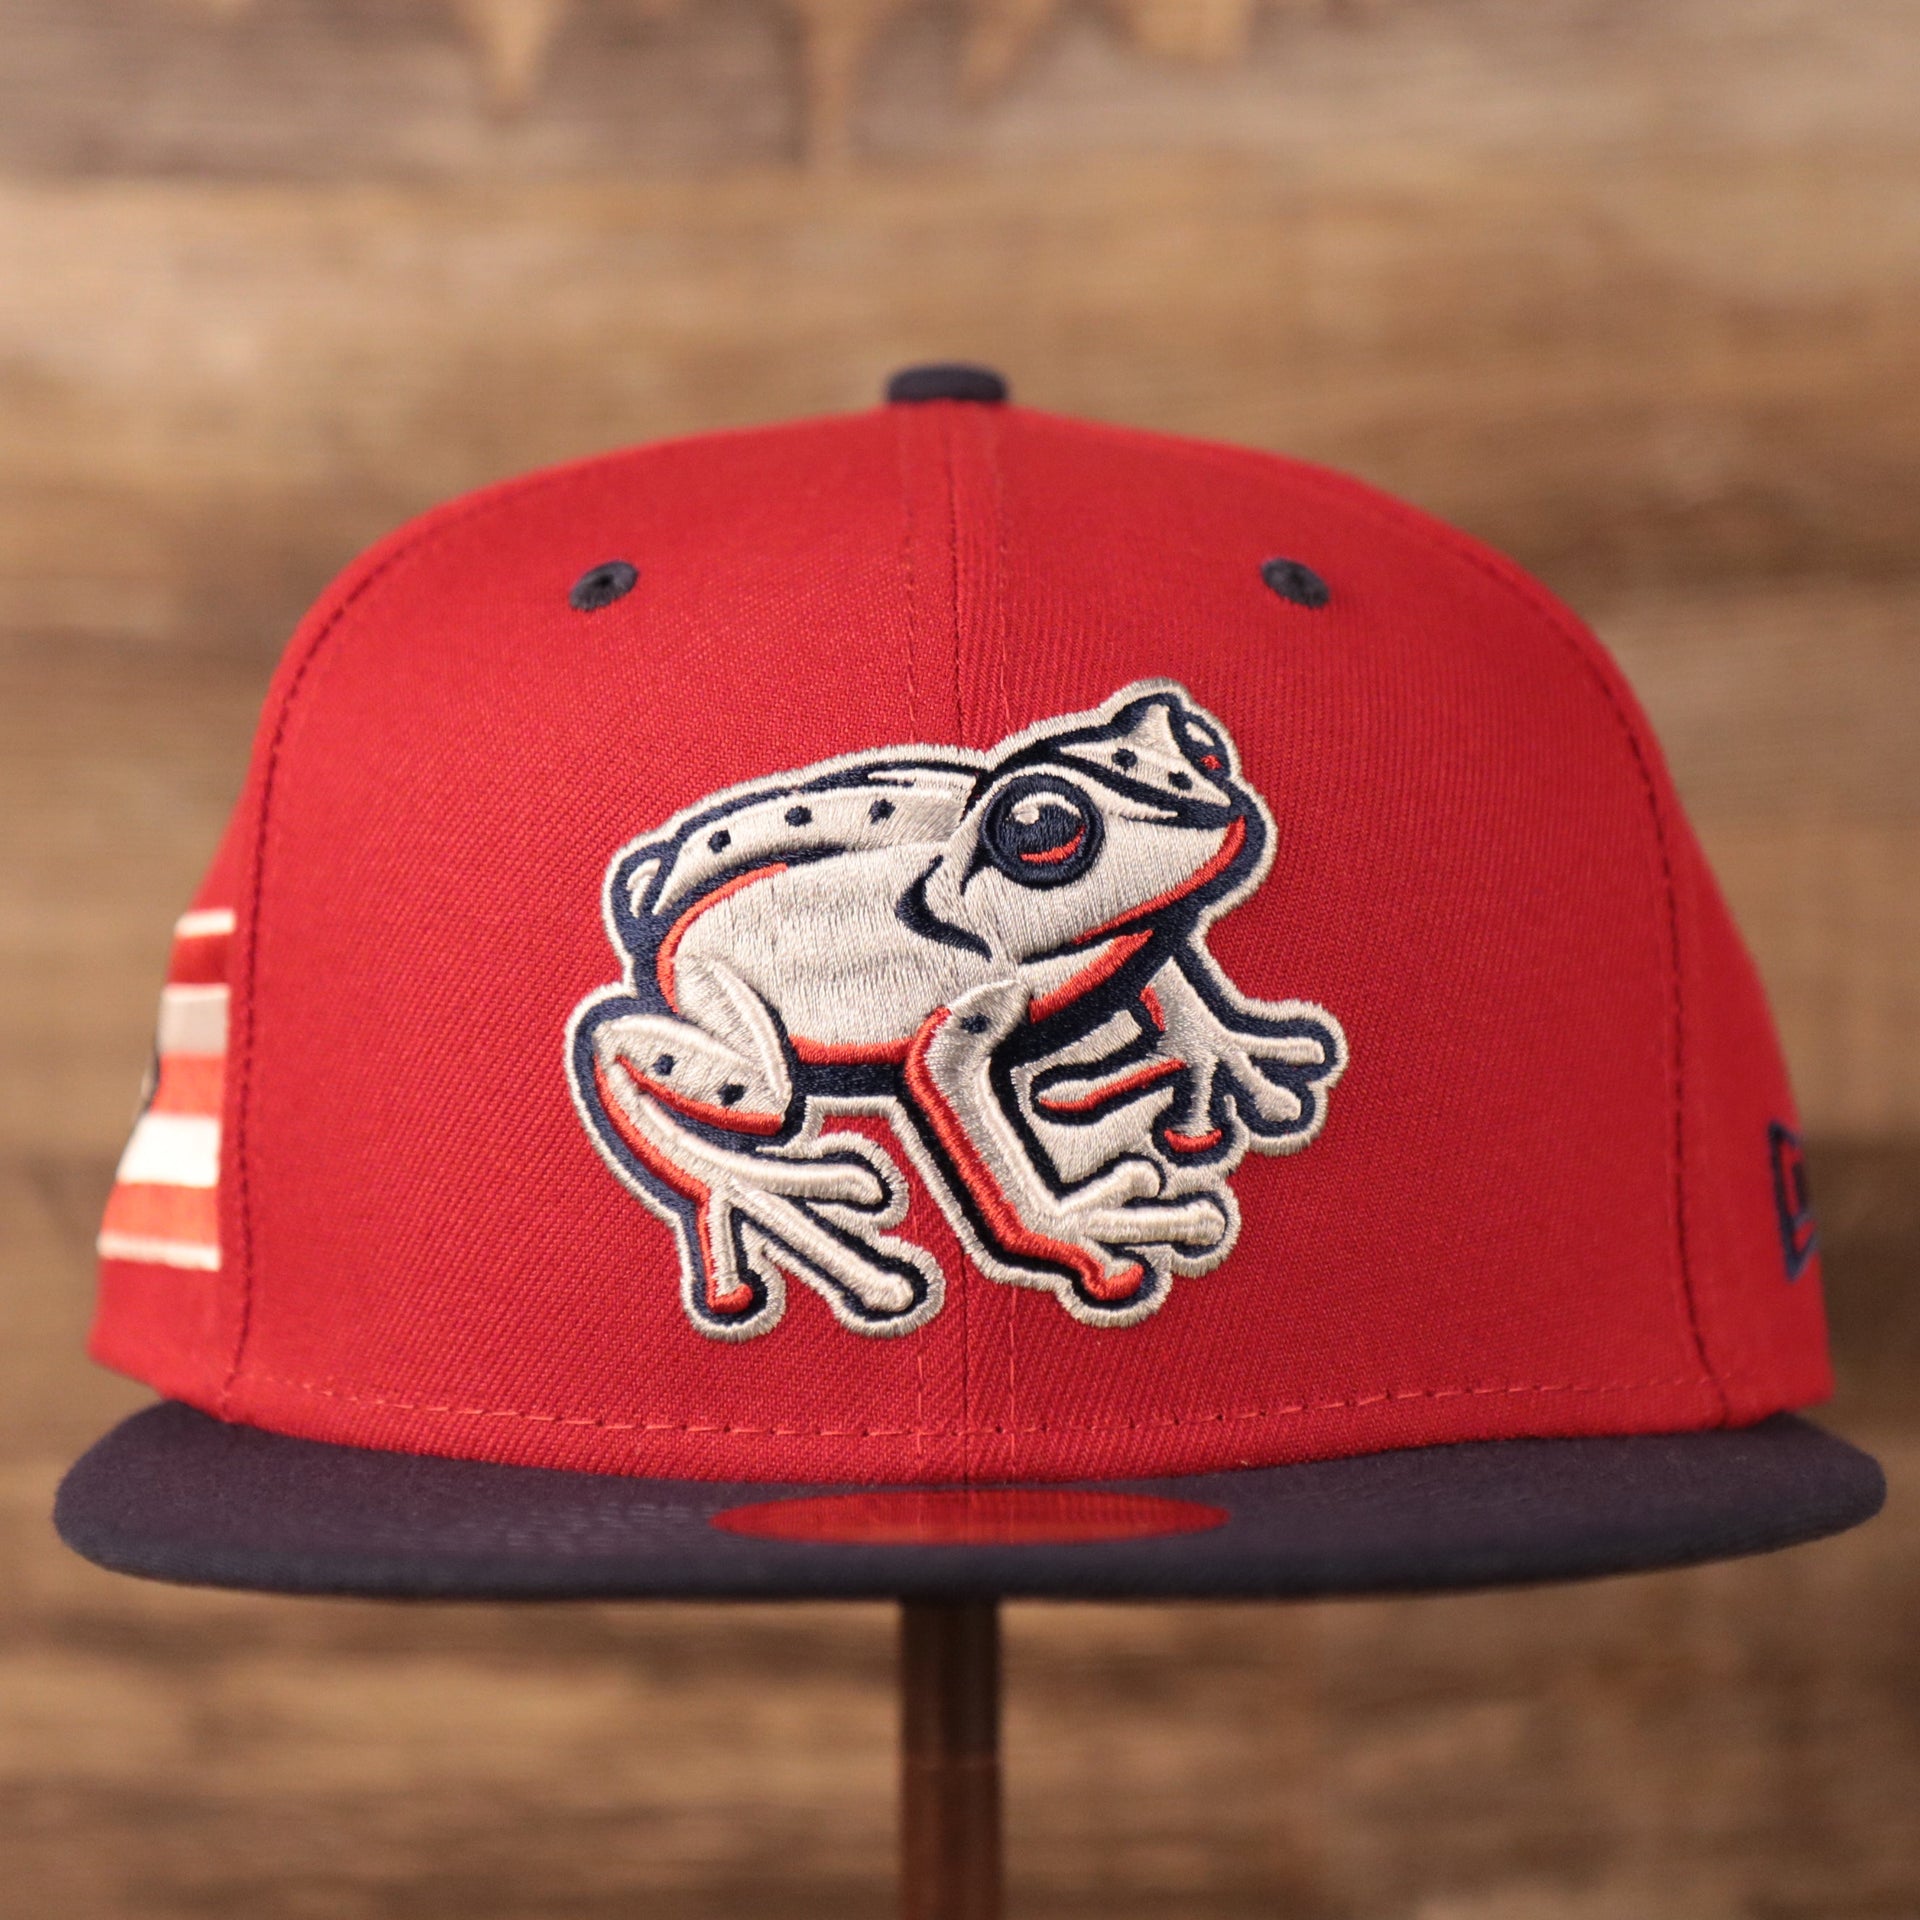 The red lehigh valley coquis fitted 5950 for the MiLB Copa by New Era.